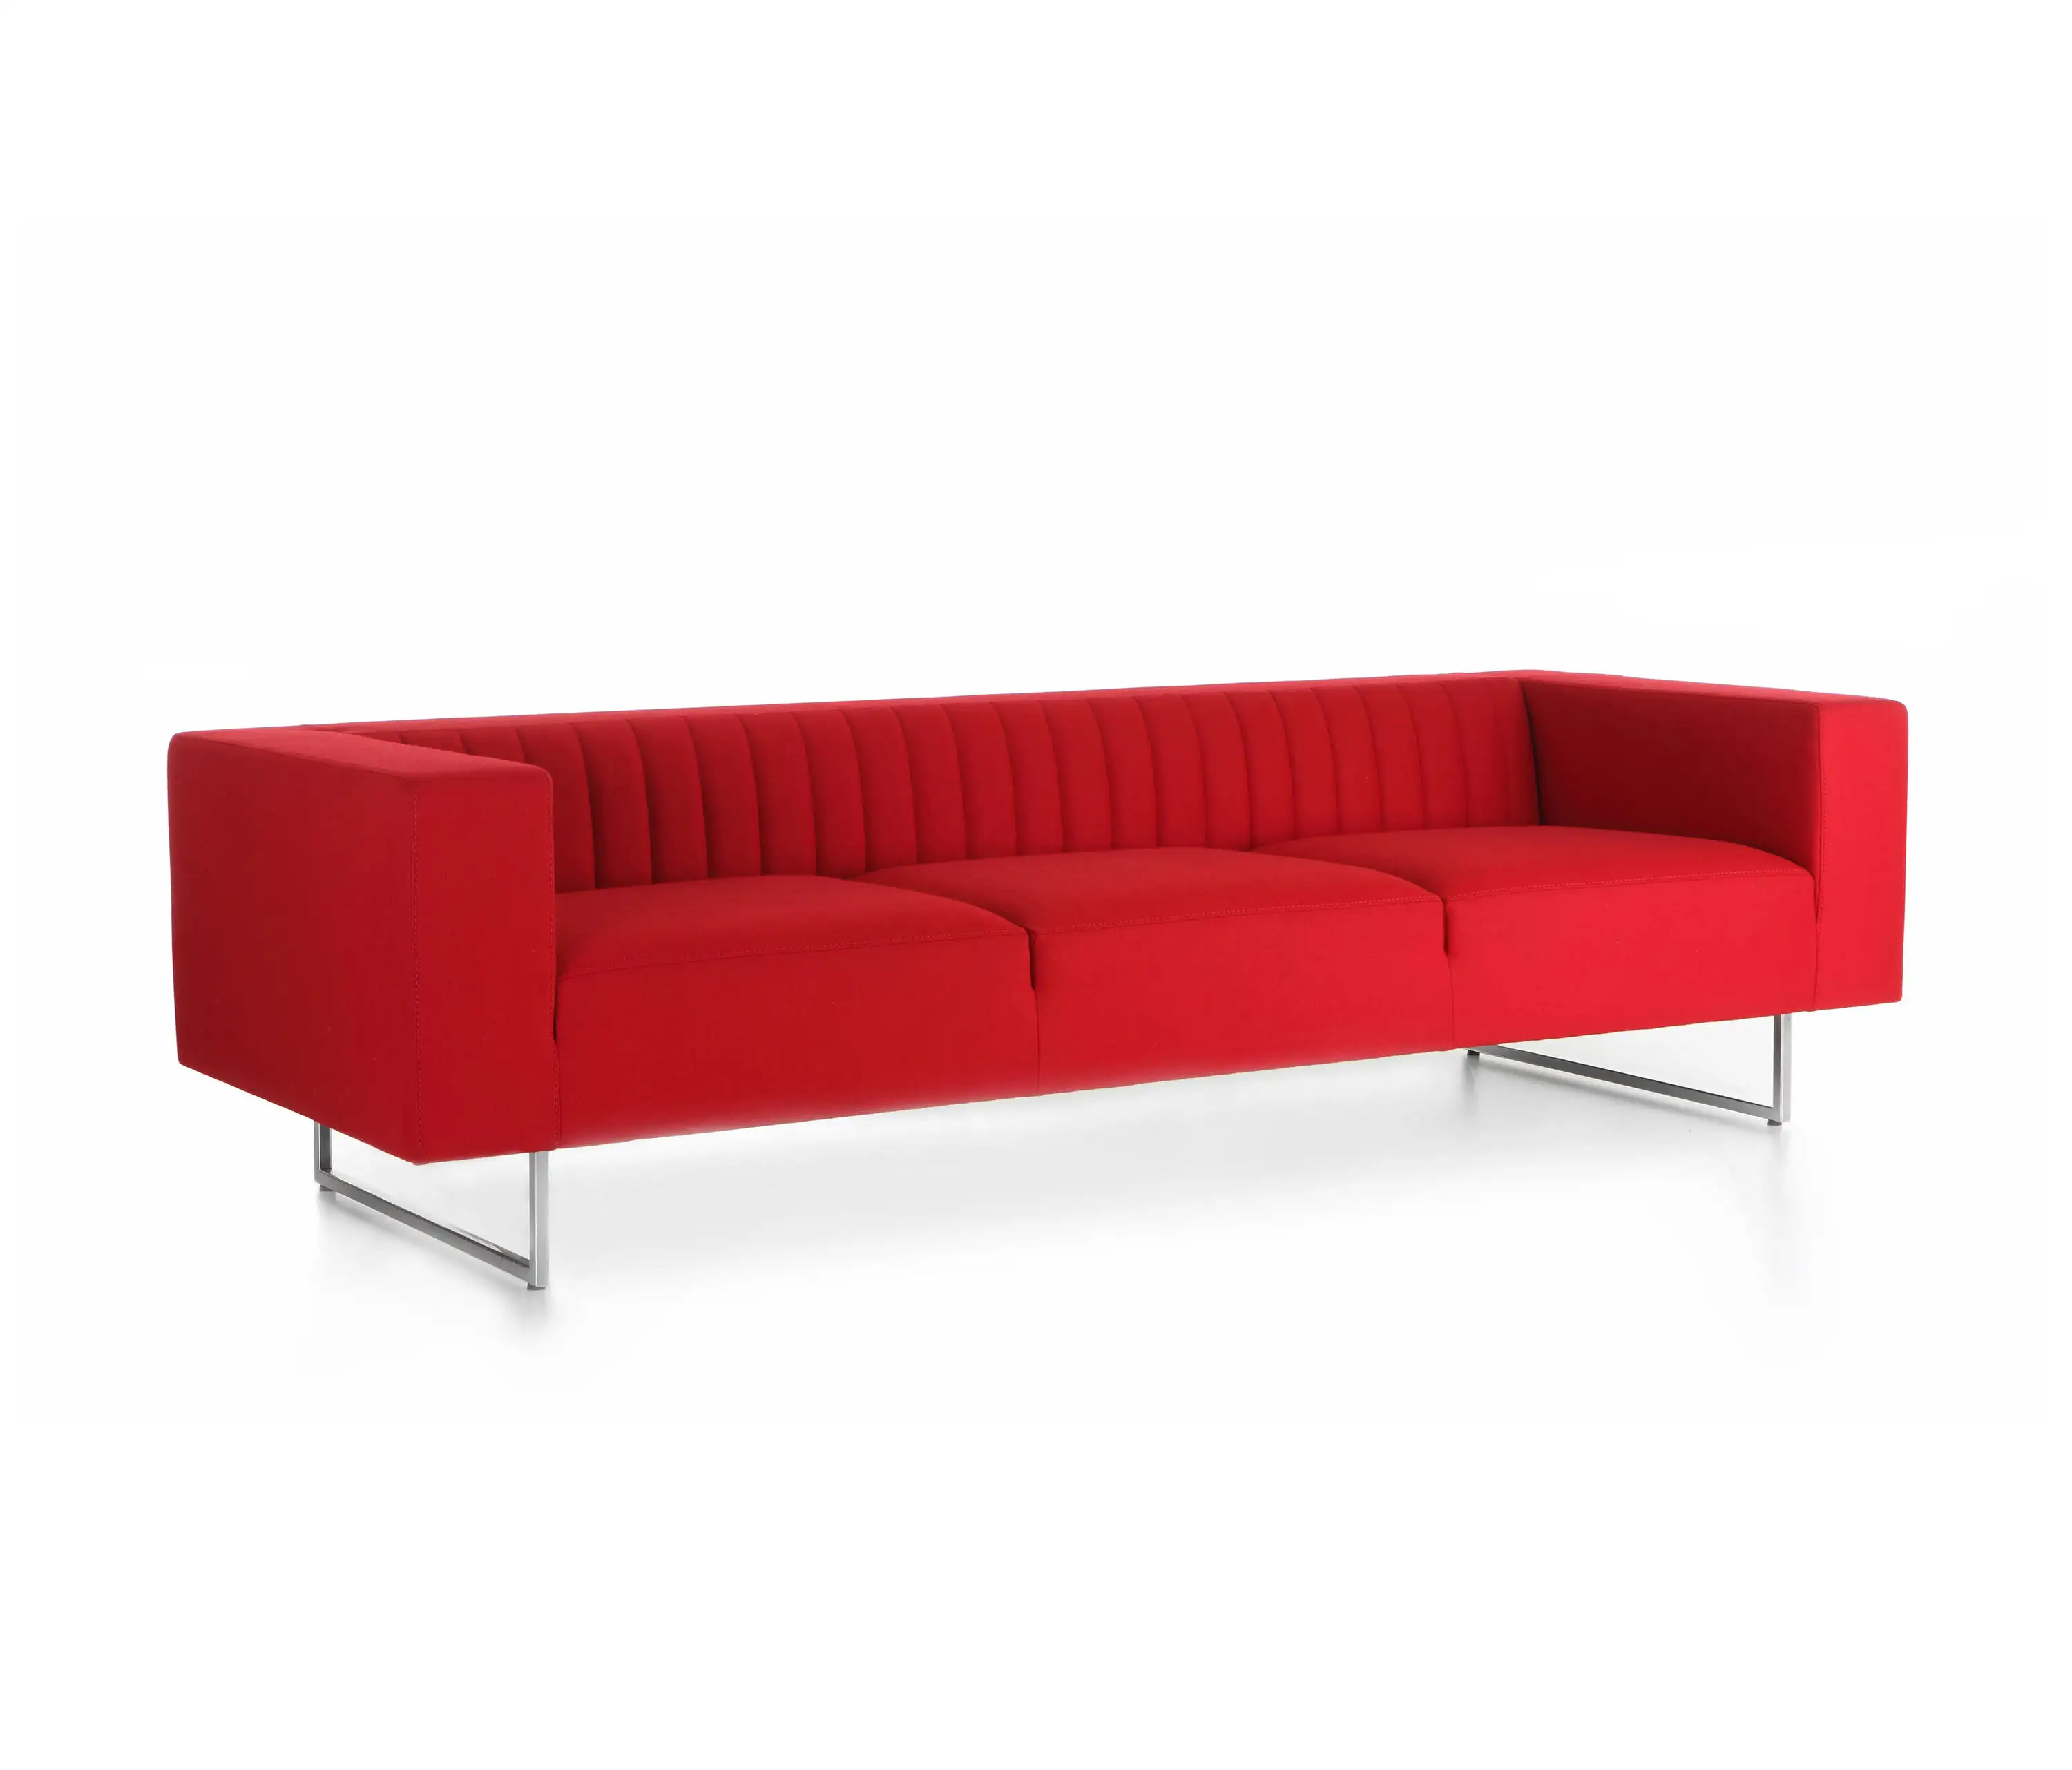 Factory Custom sofa office furniture Minimalist Style 3 Seater Reception Office Leather Sofa modern red living room sofa couch